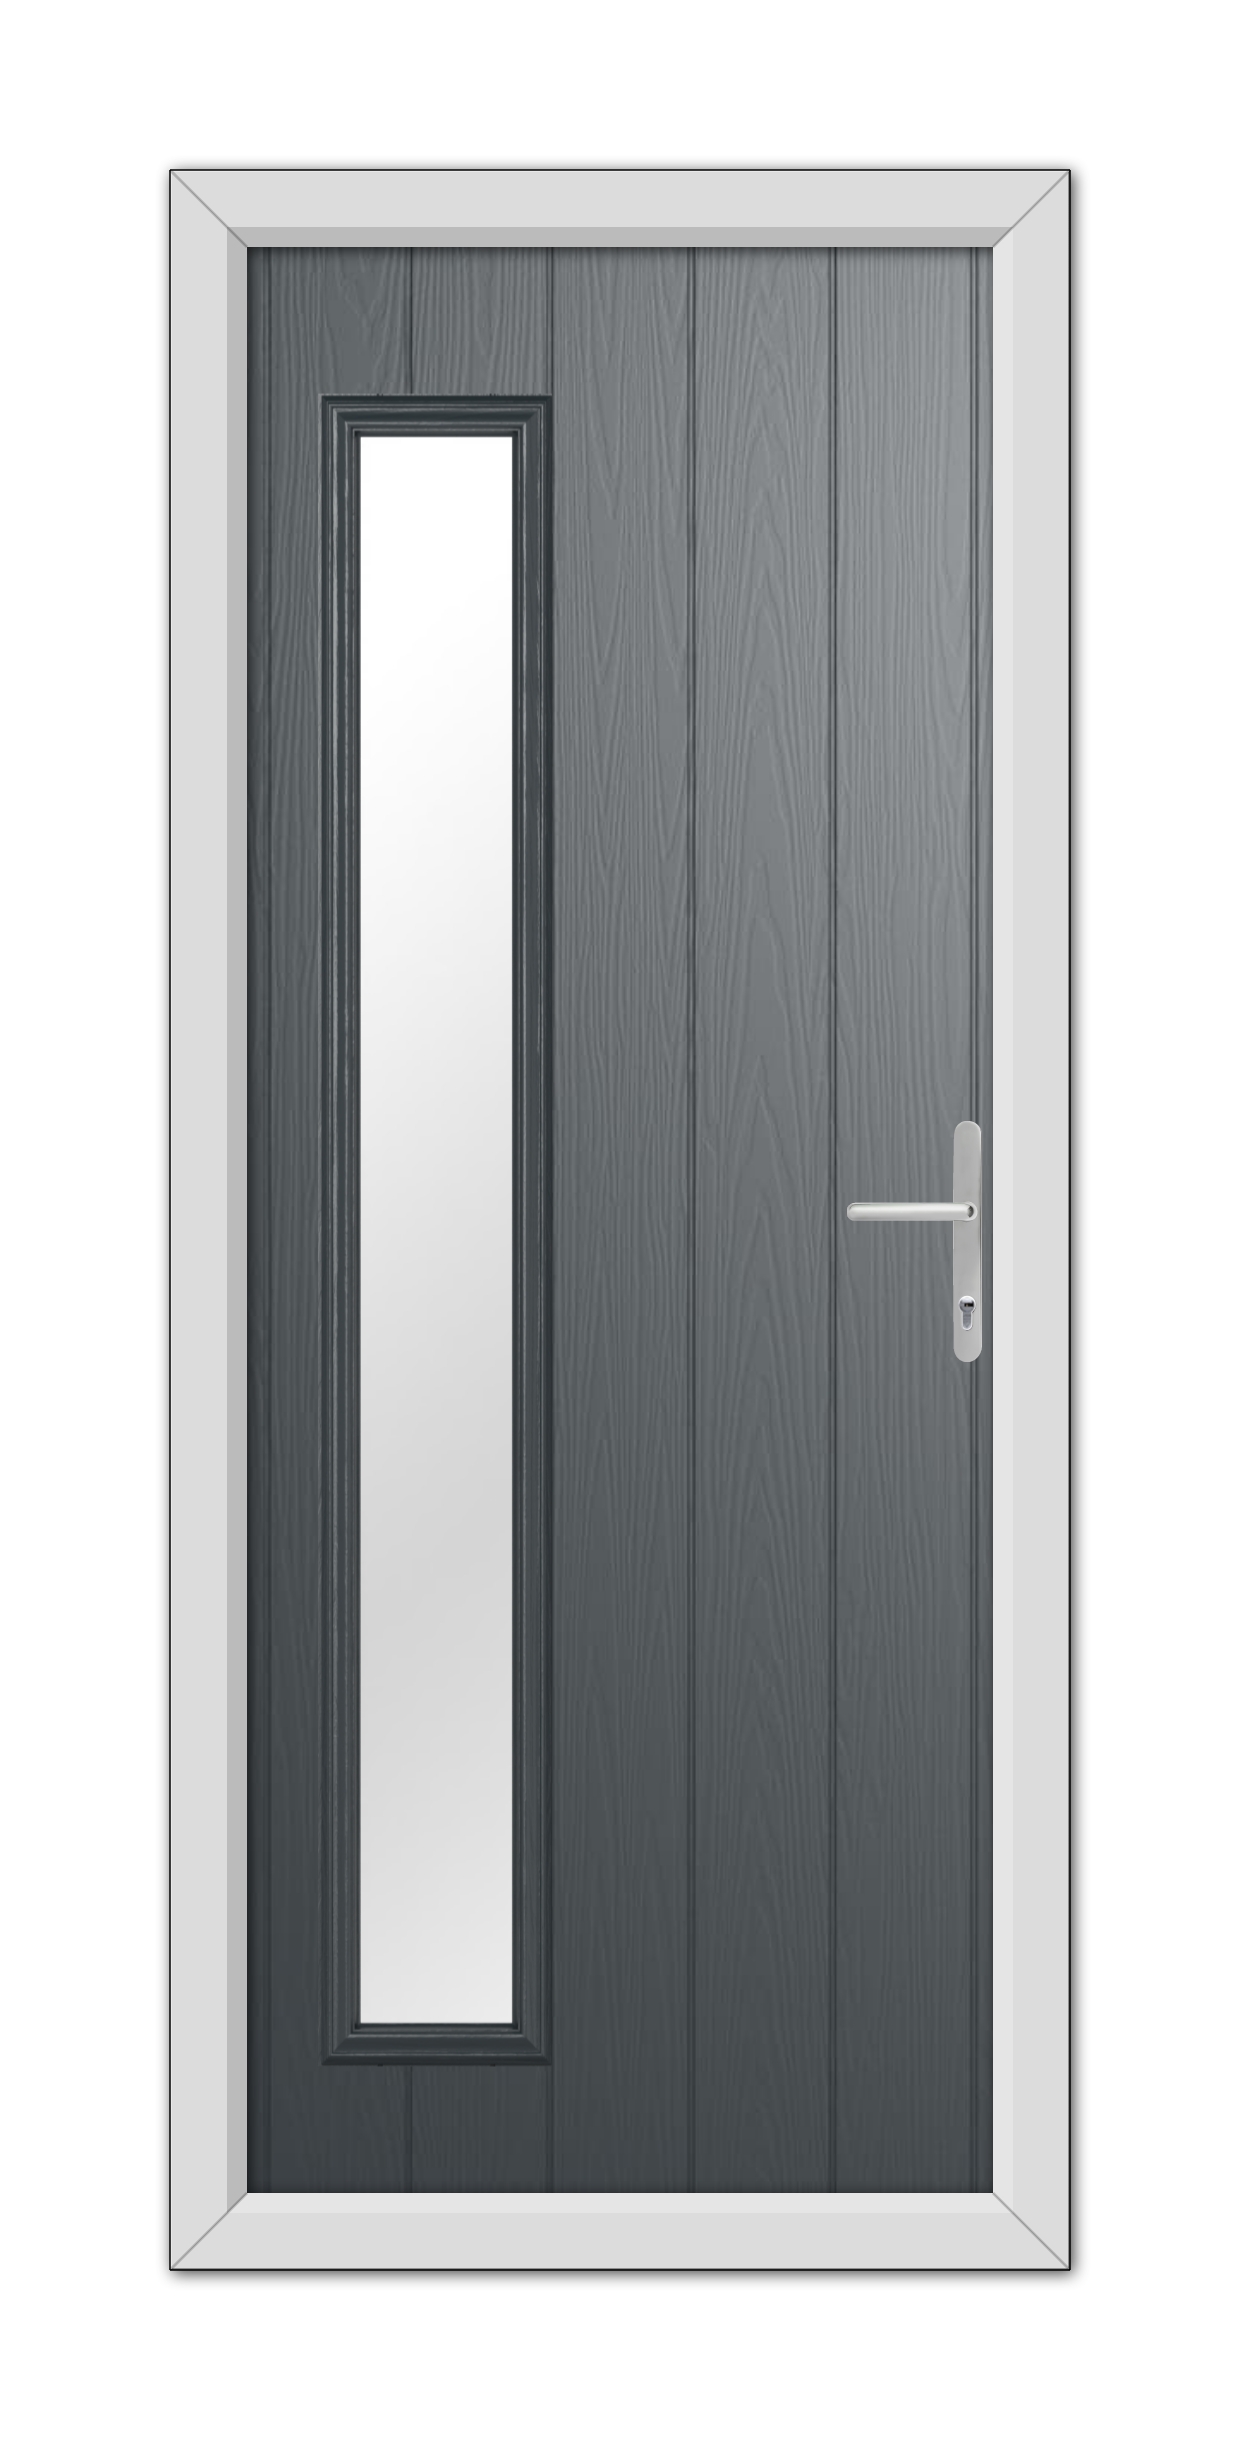 A modern Anthracite Grey Sutherland Composite Door 48mm Timber Core with a vertical, narrow window and a metallic handle, set within a white frame.